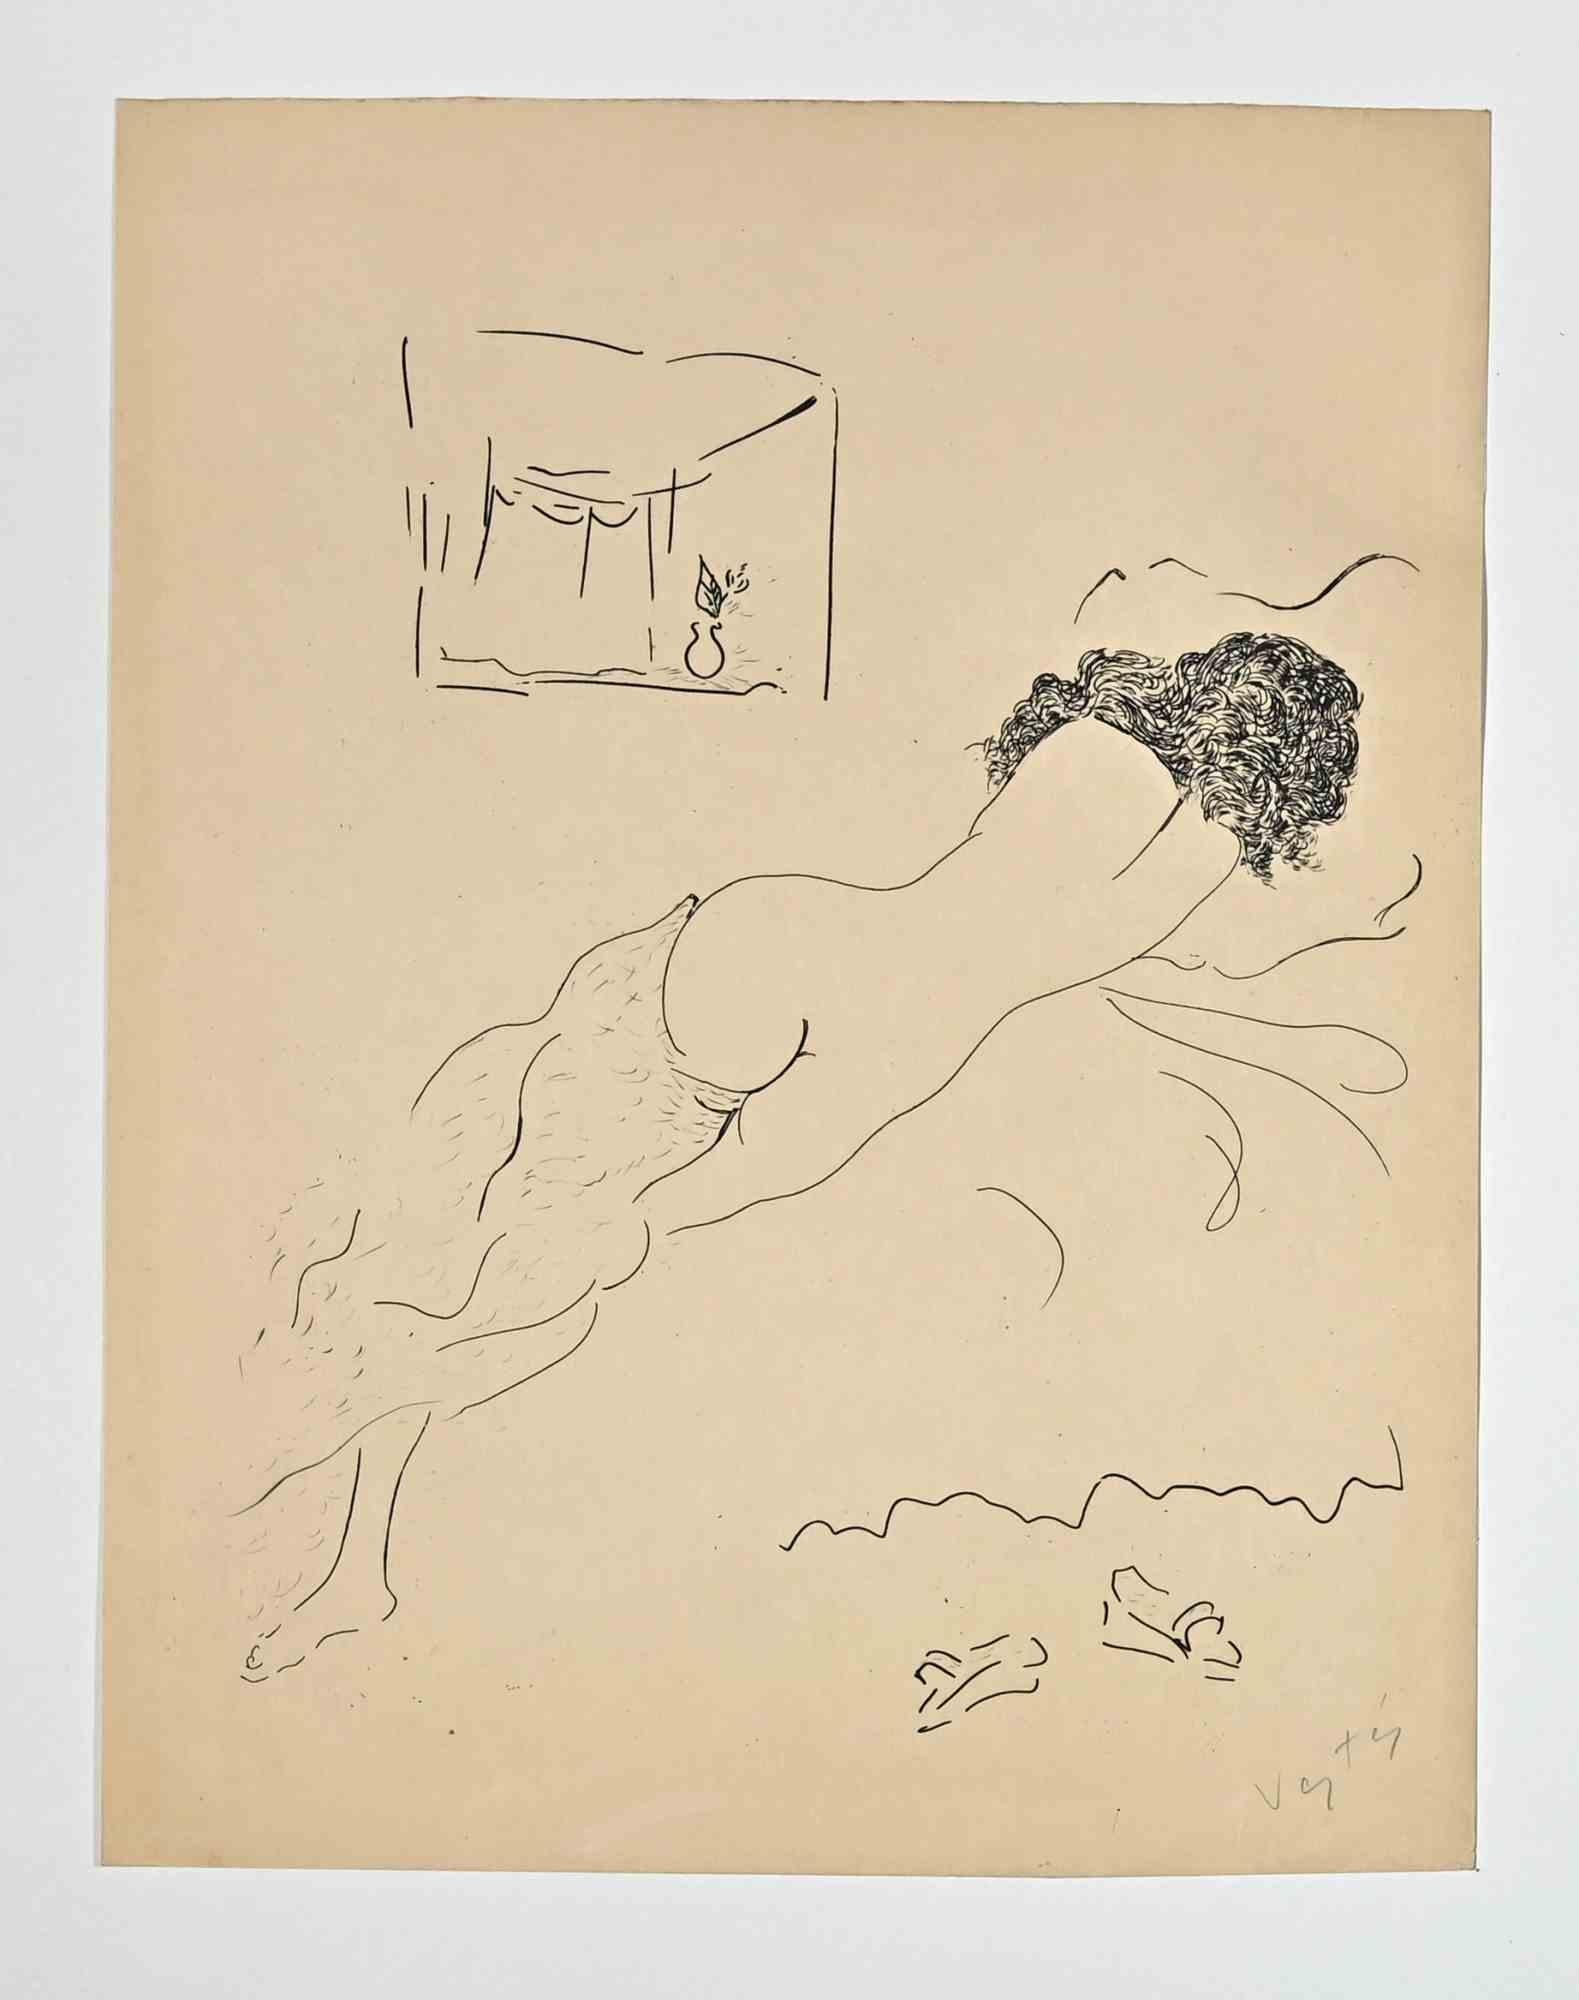 Nude From Back is lithograph on Japanese paper realized by Marcel Vertès in the mid-20th Century.

Hand-signed on the lower. Included a Passepartout: 58 x 38 cm

The artwork is in good condition.

The artwork is depicted through soft delicate